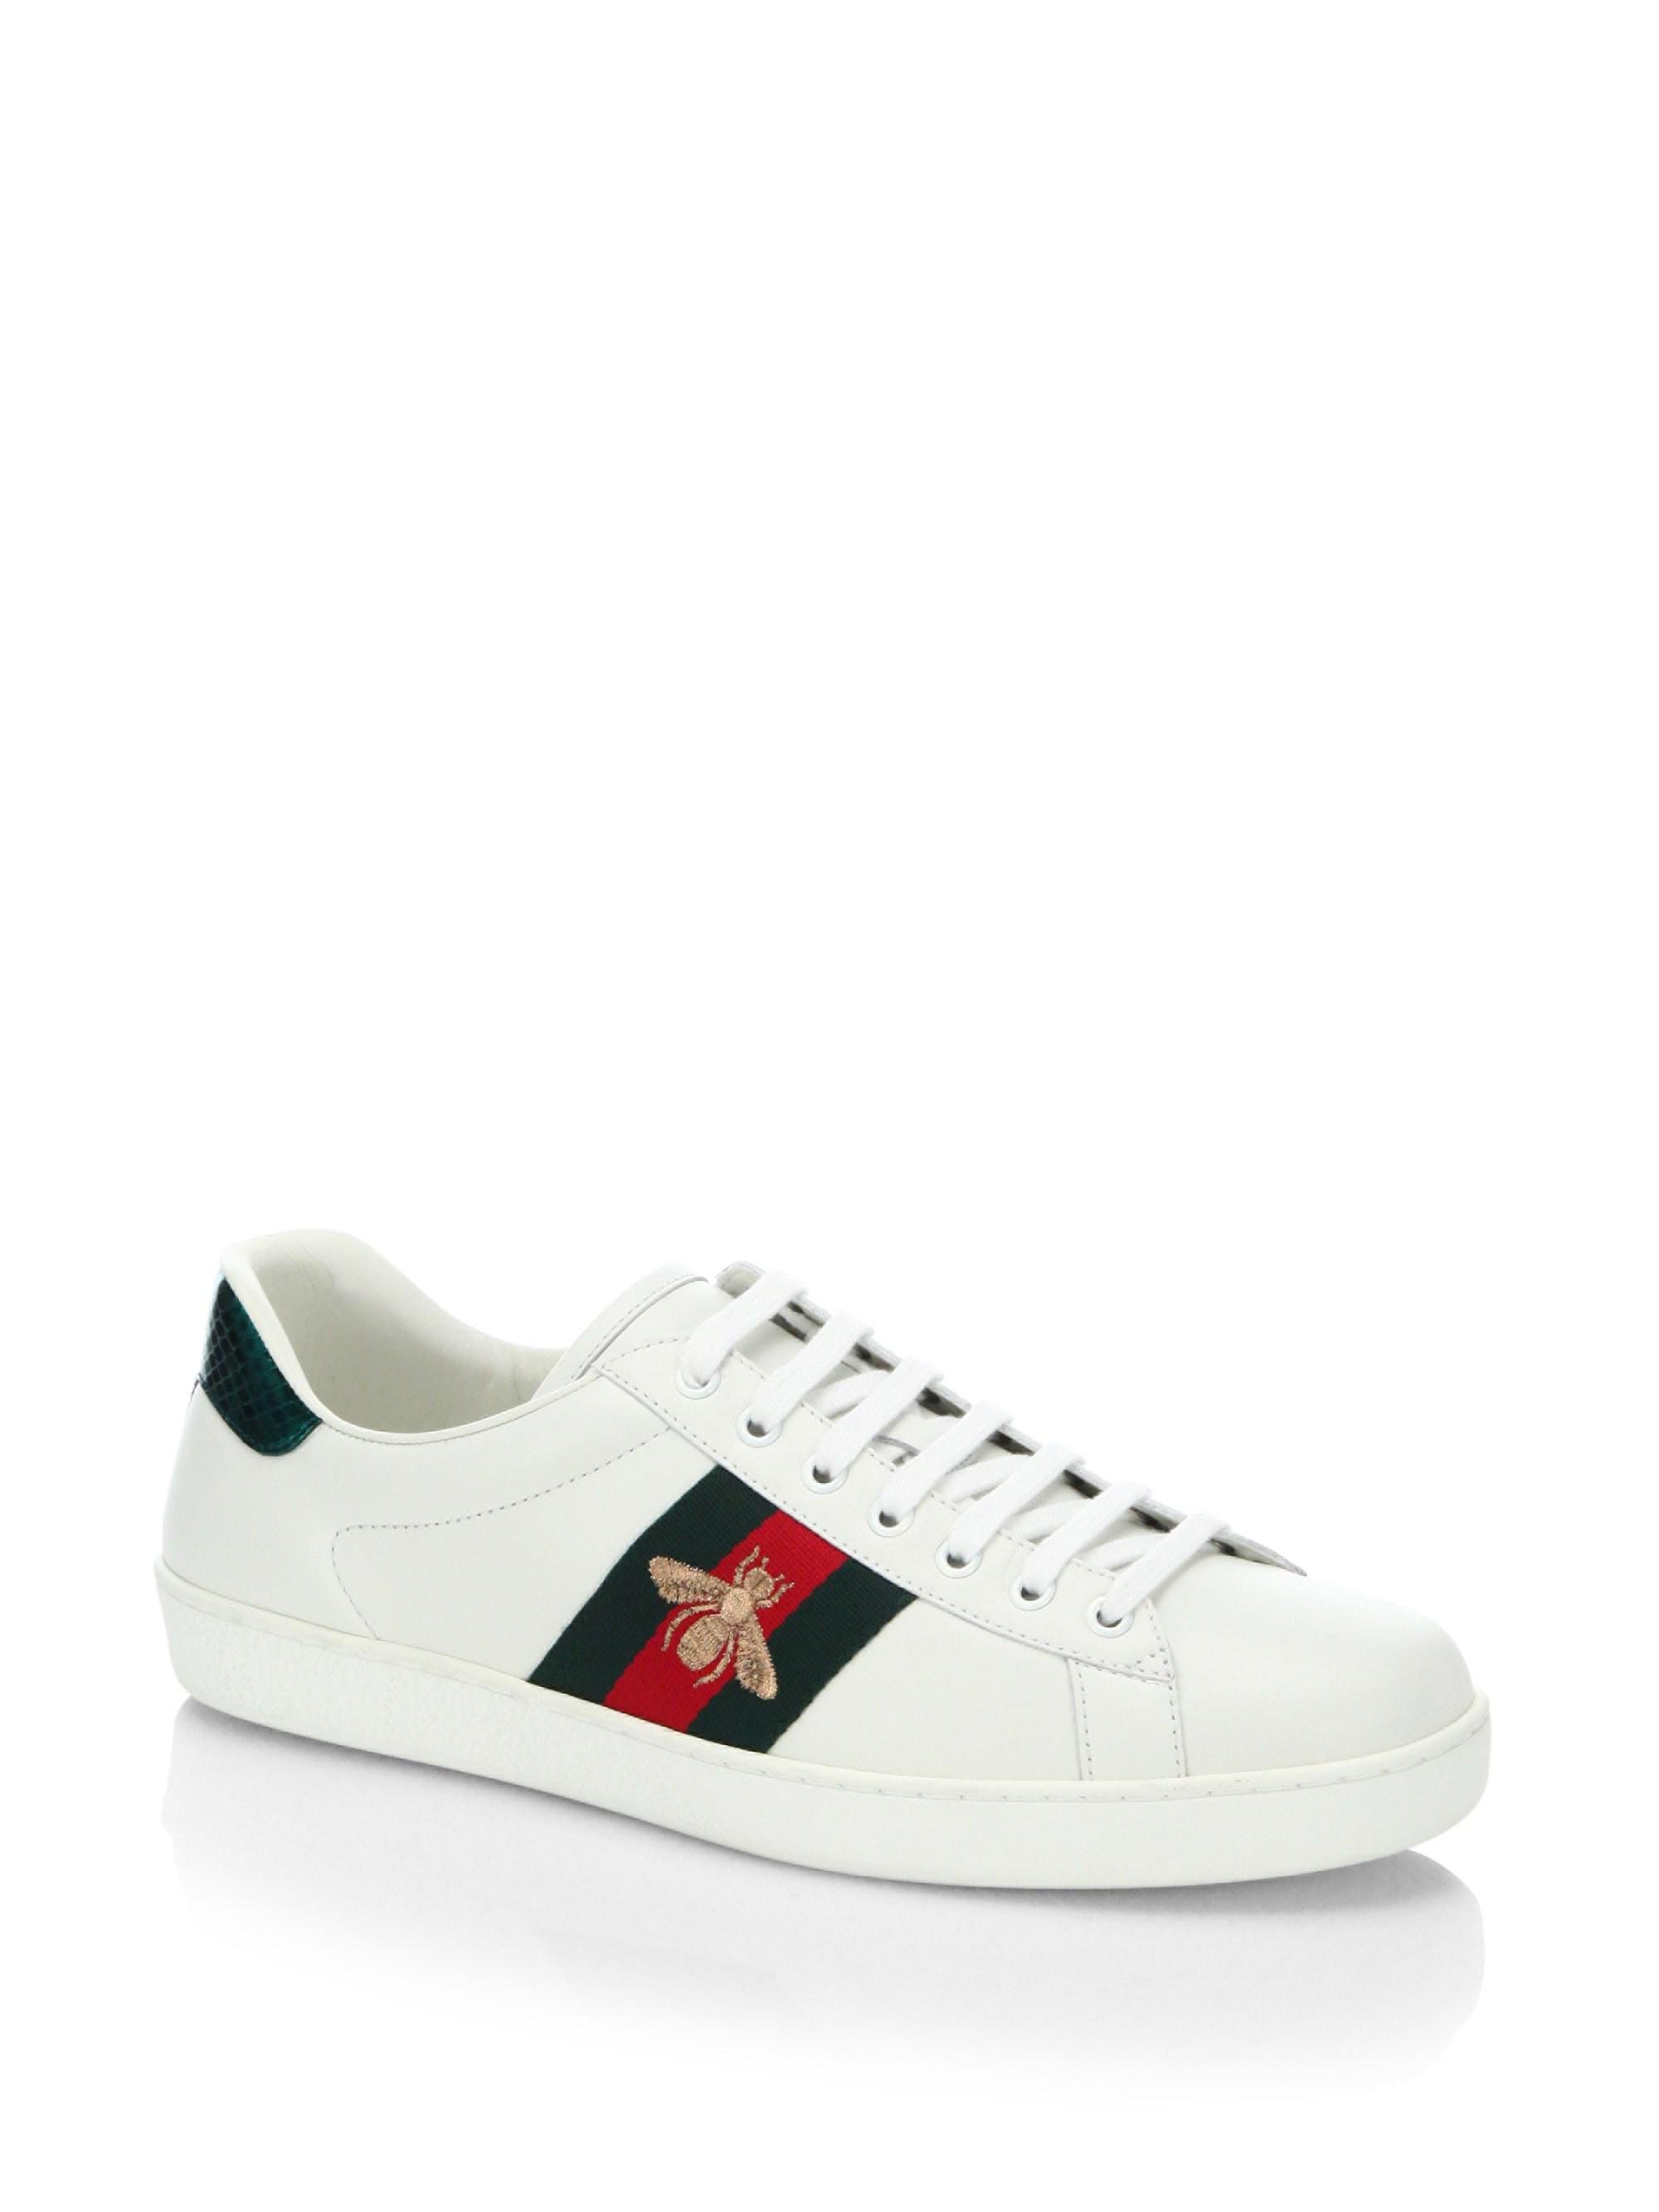 Lyst - Gucci New Ace Embroidered Sneakers in White for Men